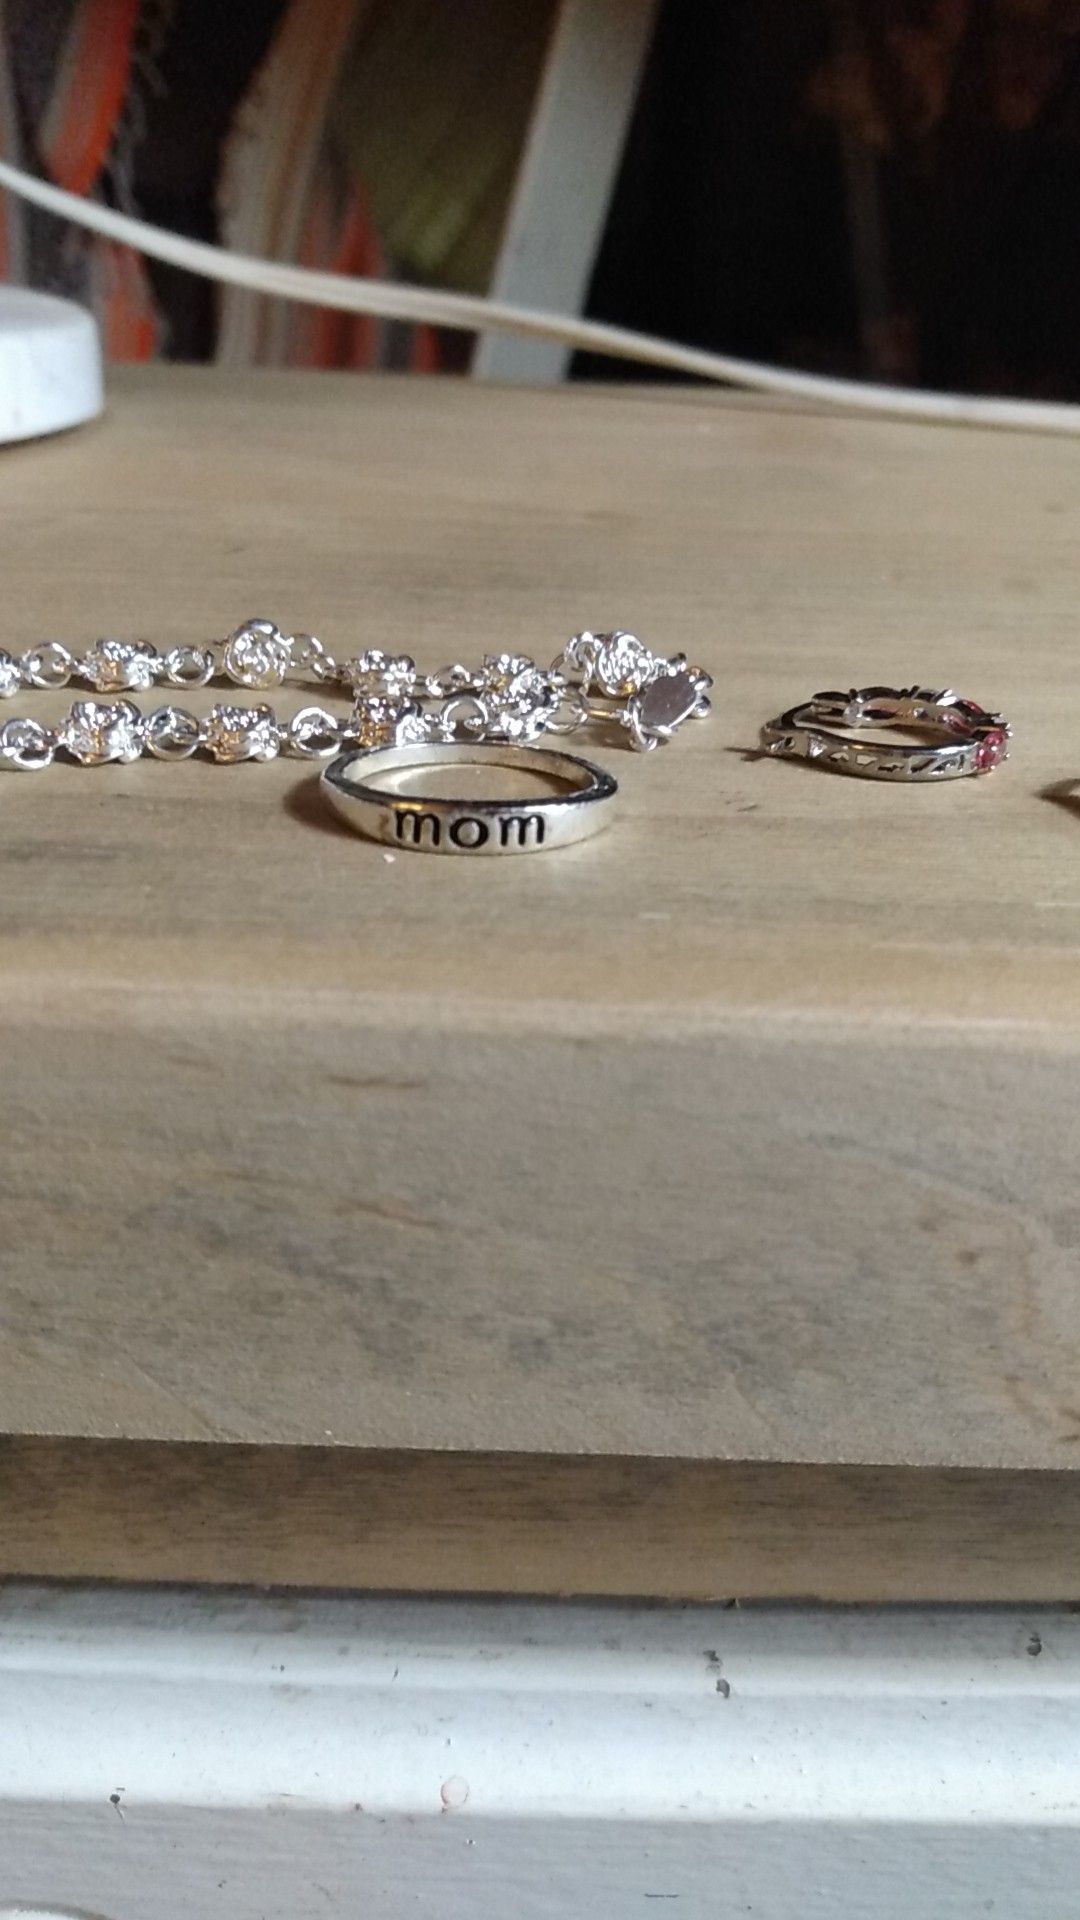 Silver "rose" bracelet and "mom" ring and pink and diamond hoop earrings